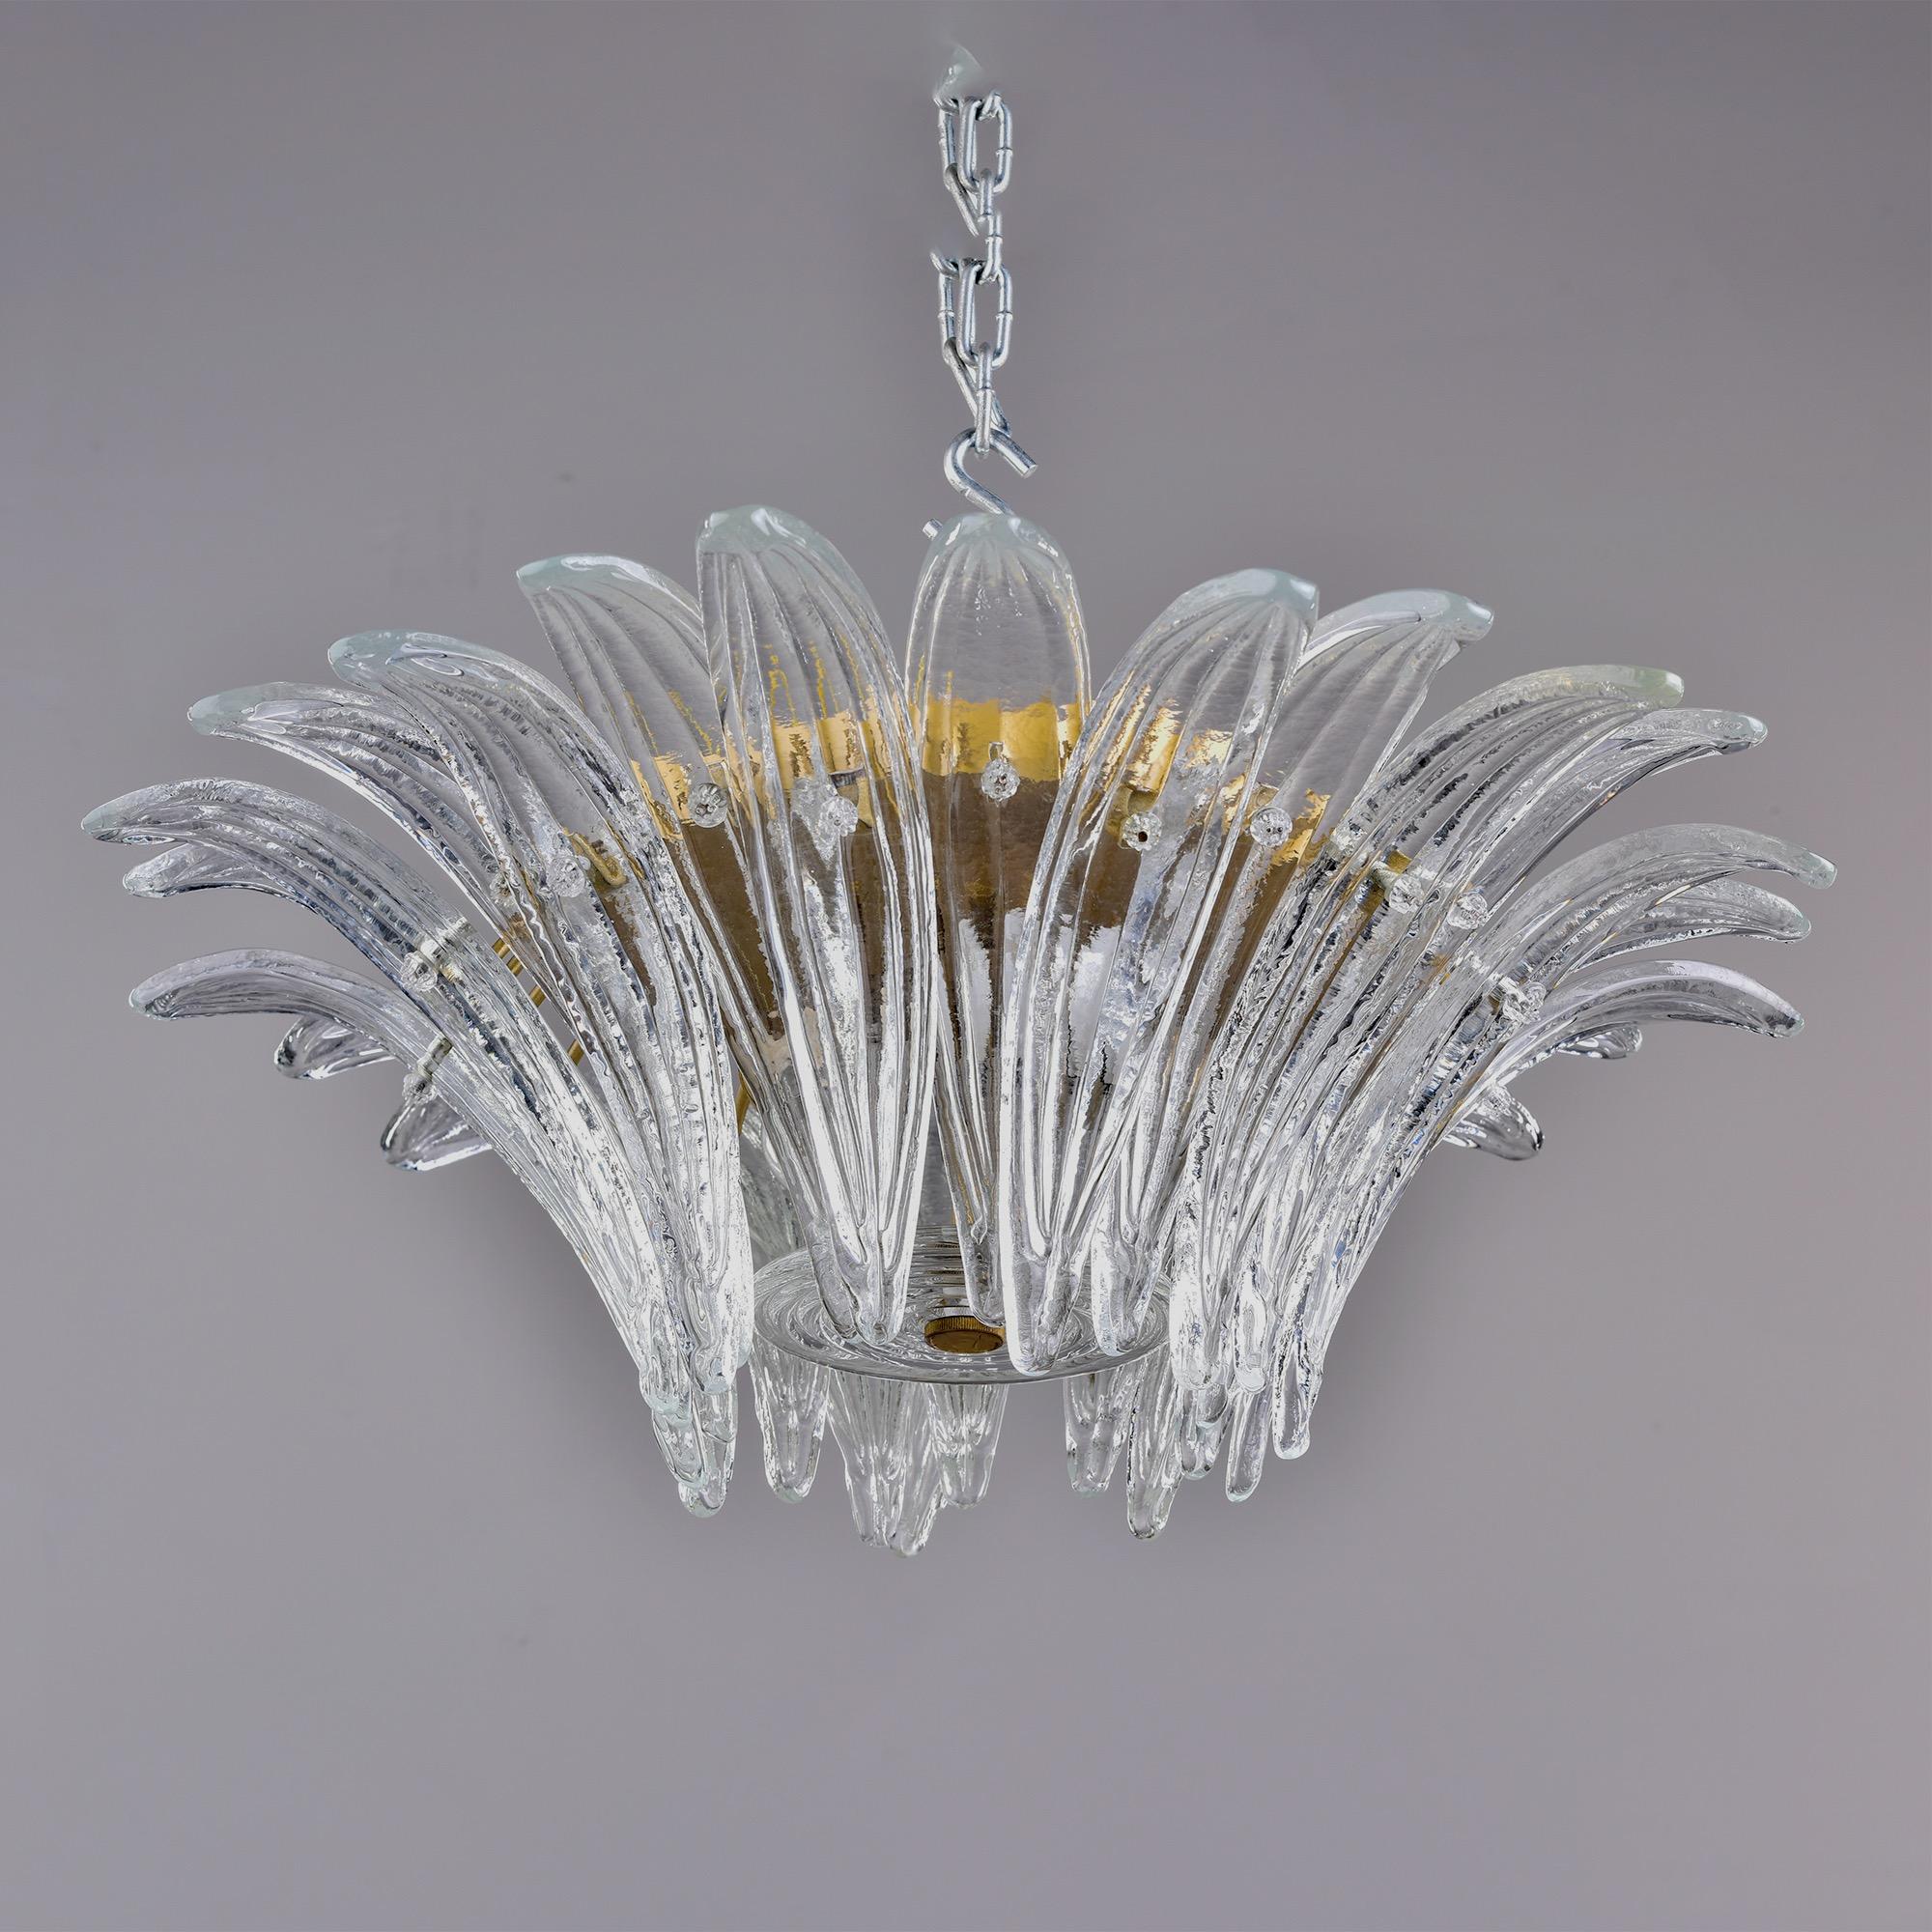 Circa 1970s pair of Venini flush mount fixtures feature curved, leaf shaped Murano glass elements arranged in an overlapping, flared circular pattern. Each fixture has two standard sized sockets. New wiring for US electrical standards. Sold and